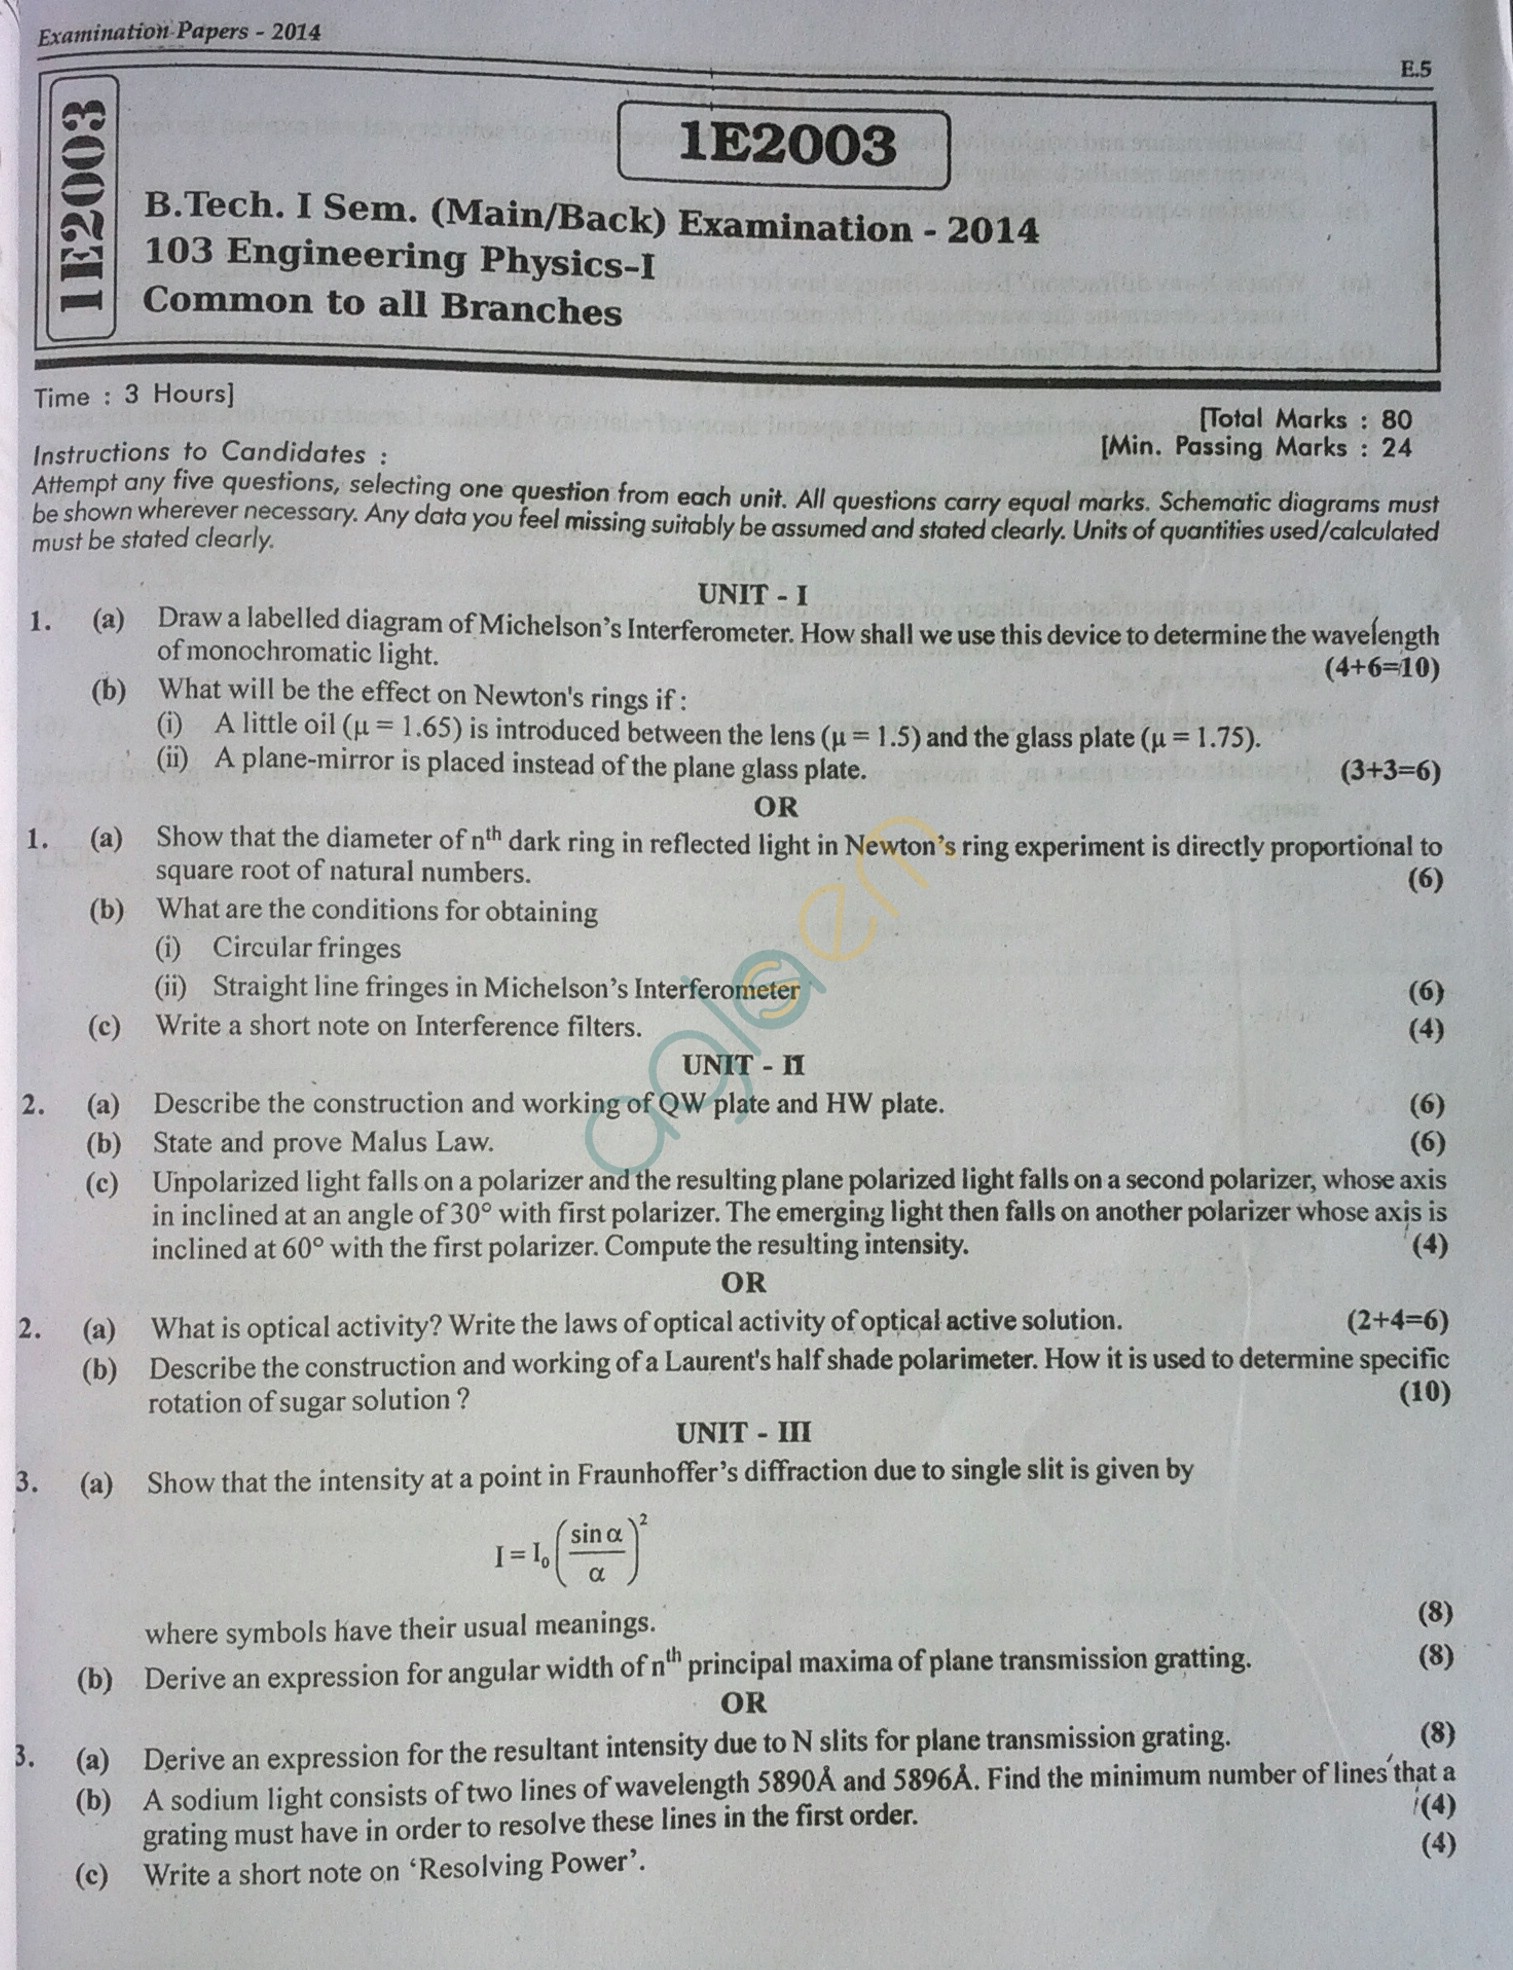 RTU: Question Papers 2014 - 1 Semester - All Branches - 1E2003